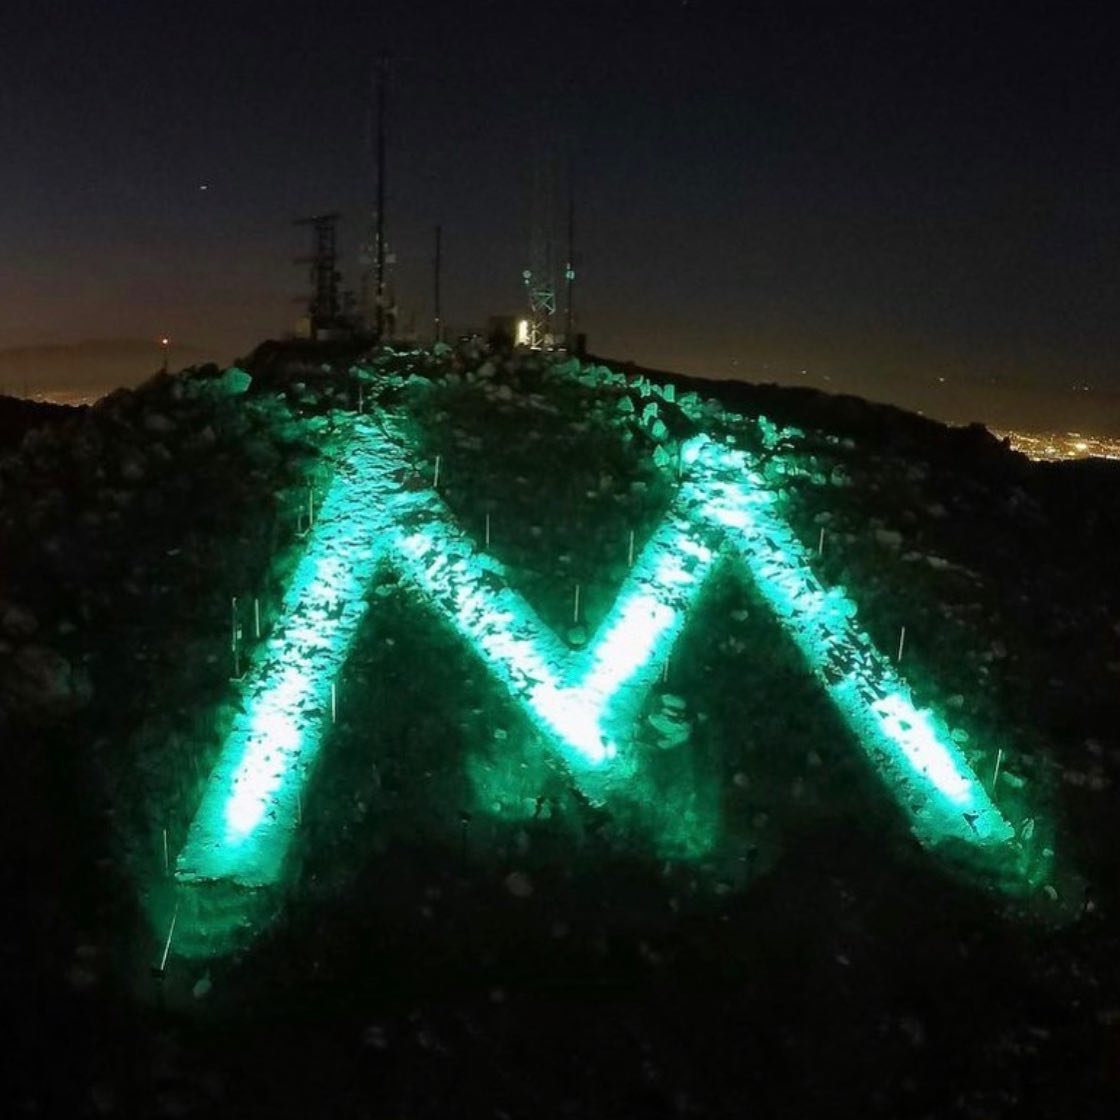 Tonight, the M on Box Springs Mountain will be lit green in honor of Mental Health Awareness Month.
.
.
.
#morenovalley #ilovemoval #mlighting #mentalhealthawareness #mentalhealth